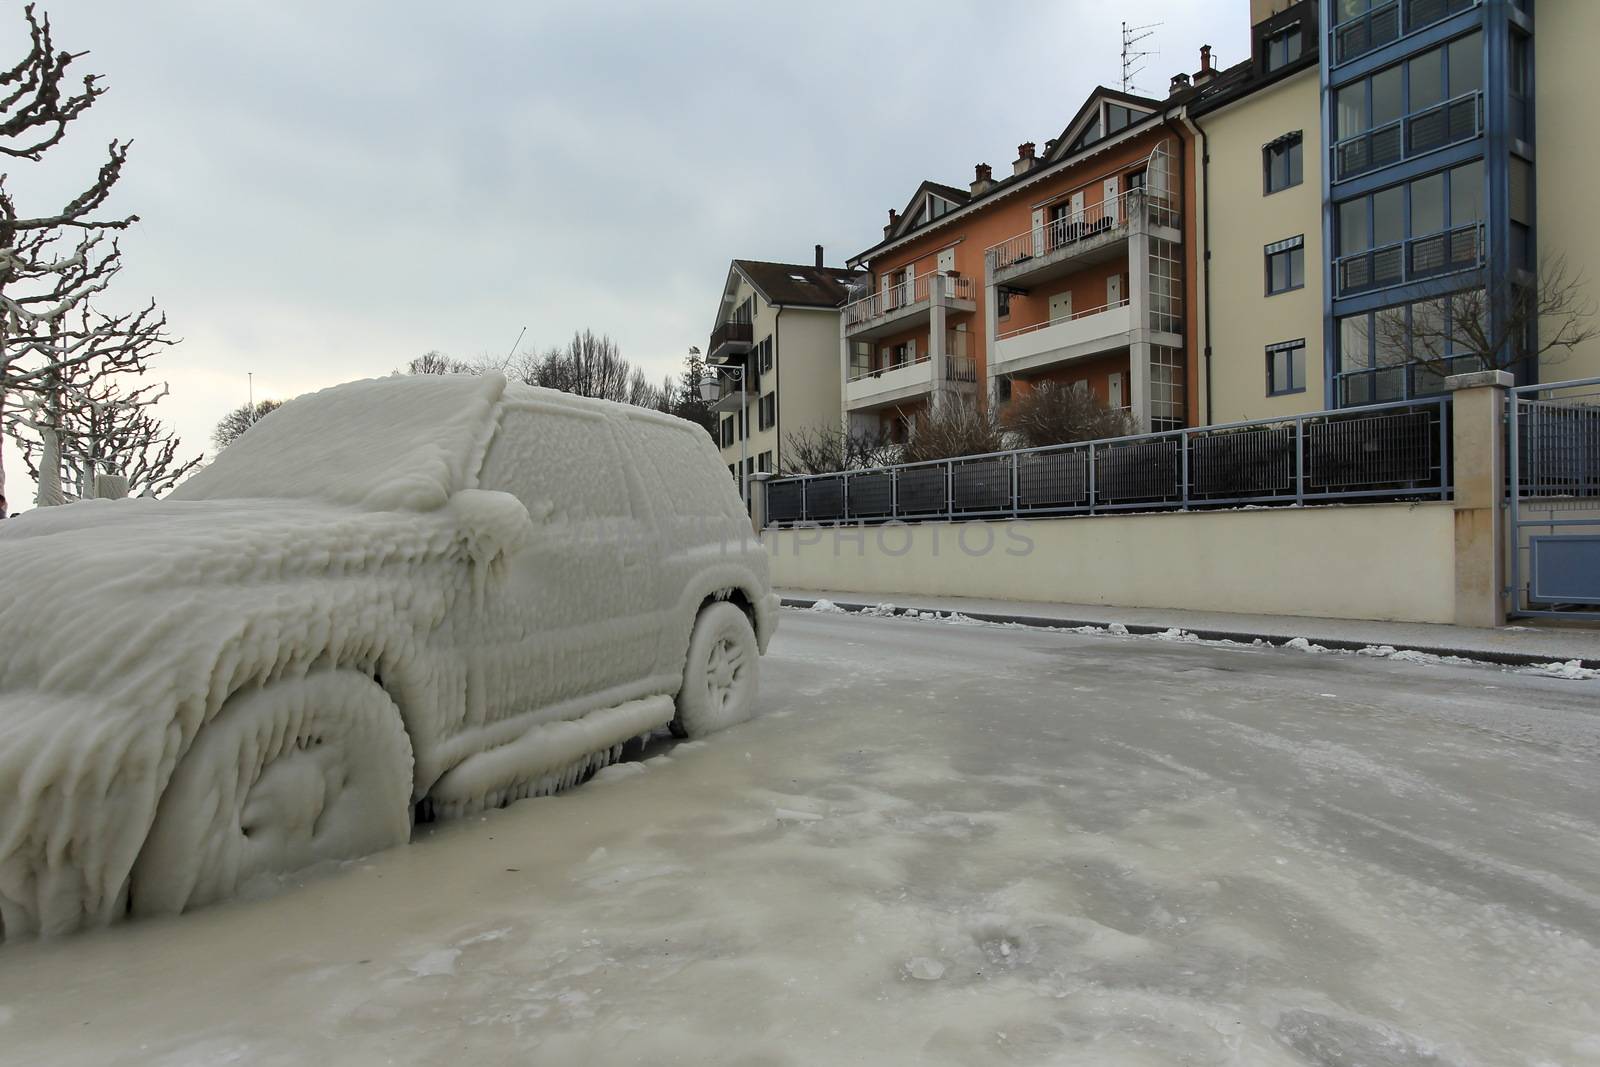 Car caught in the ice in Versoix Switzerland by mariephotos